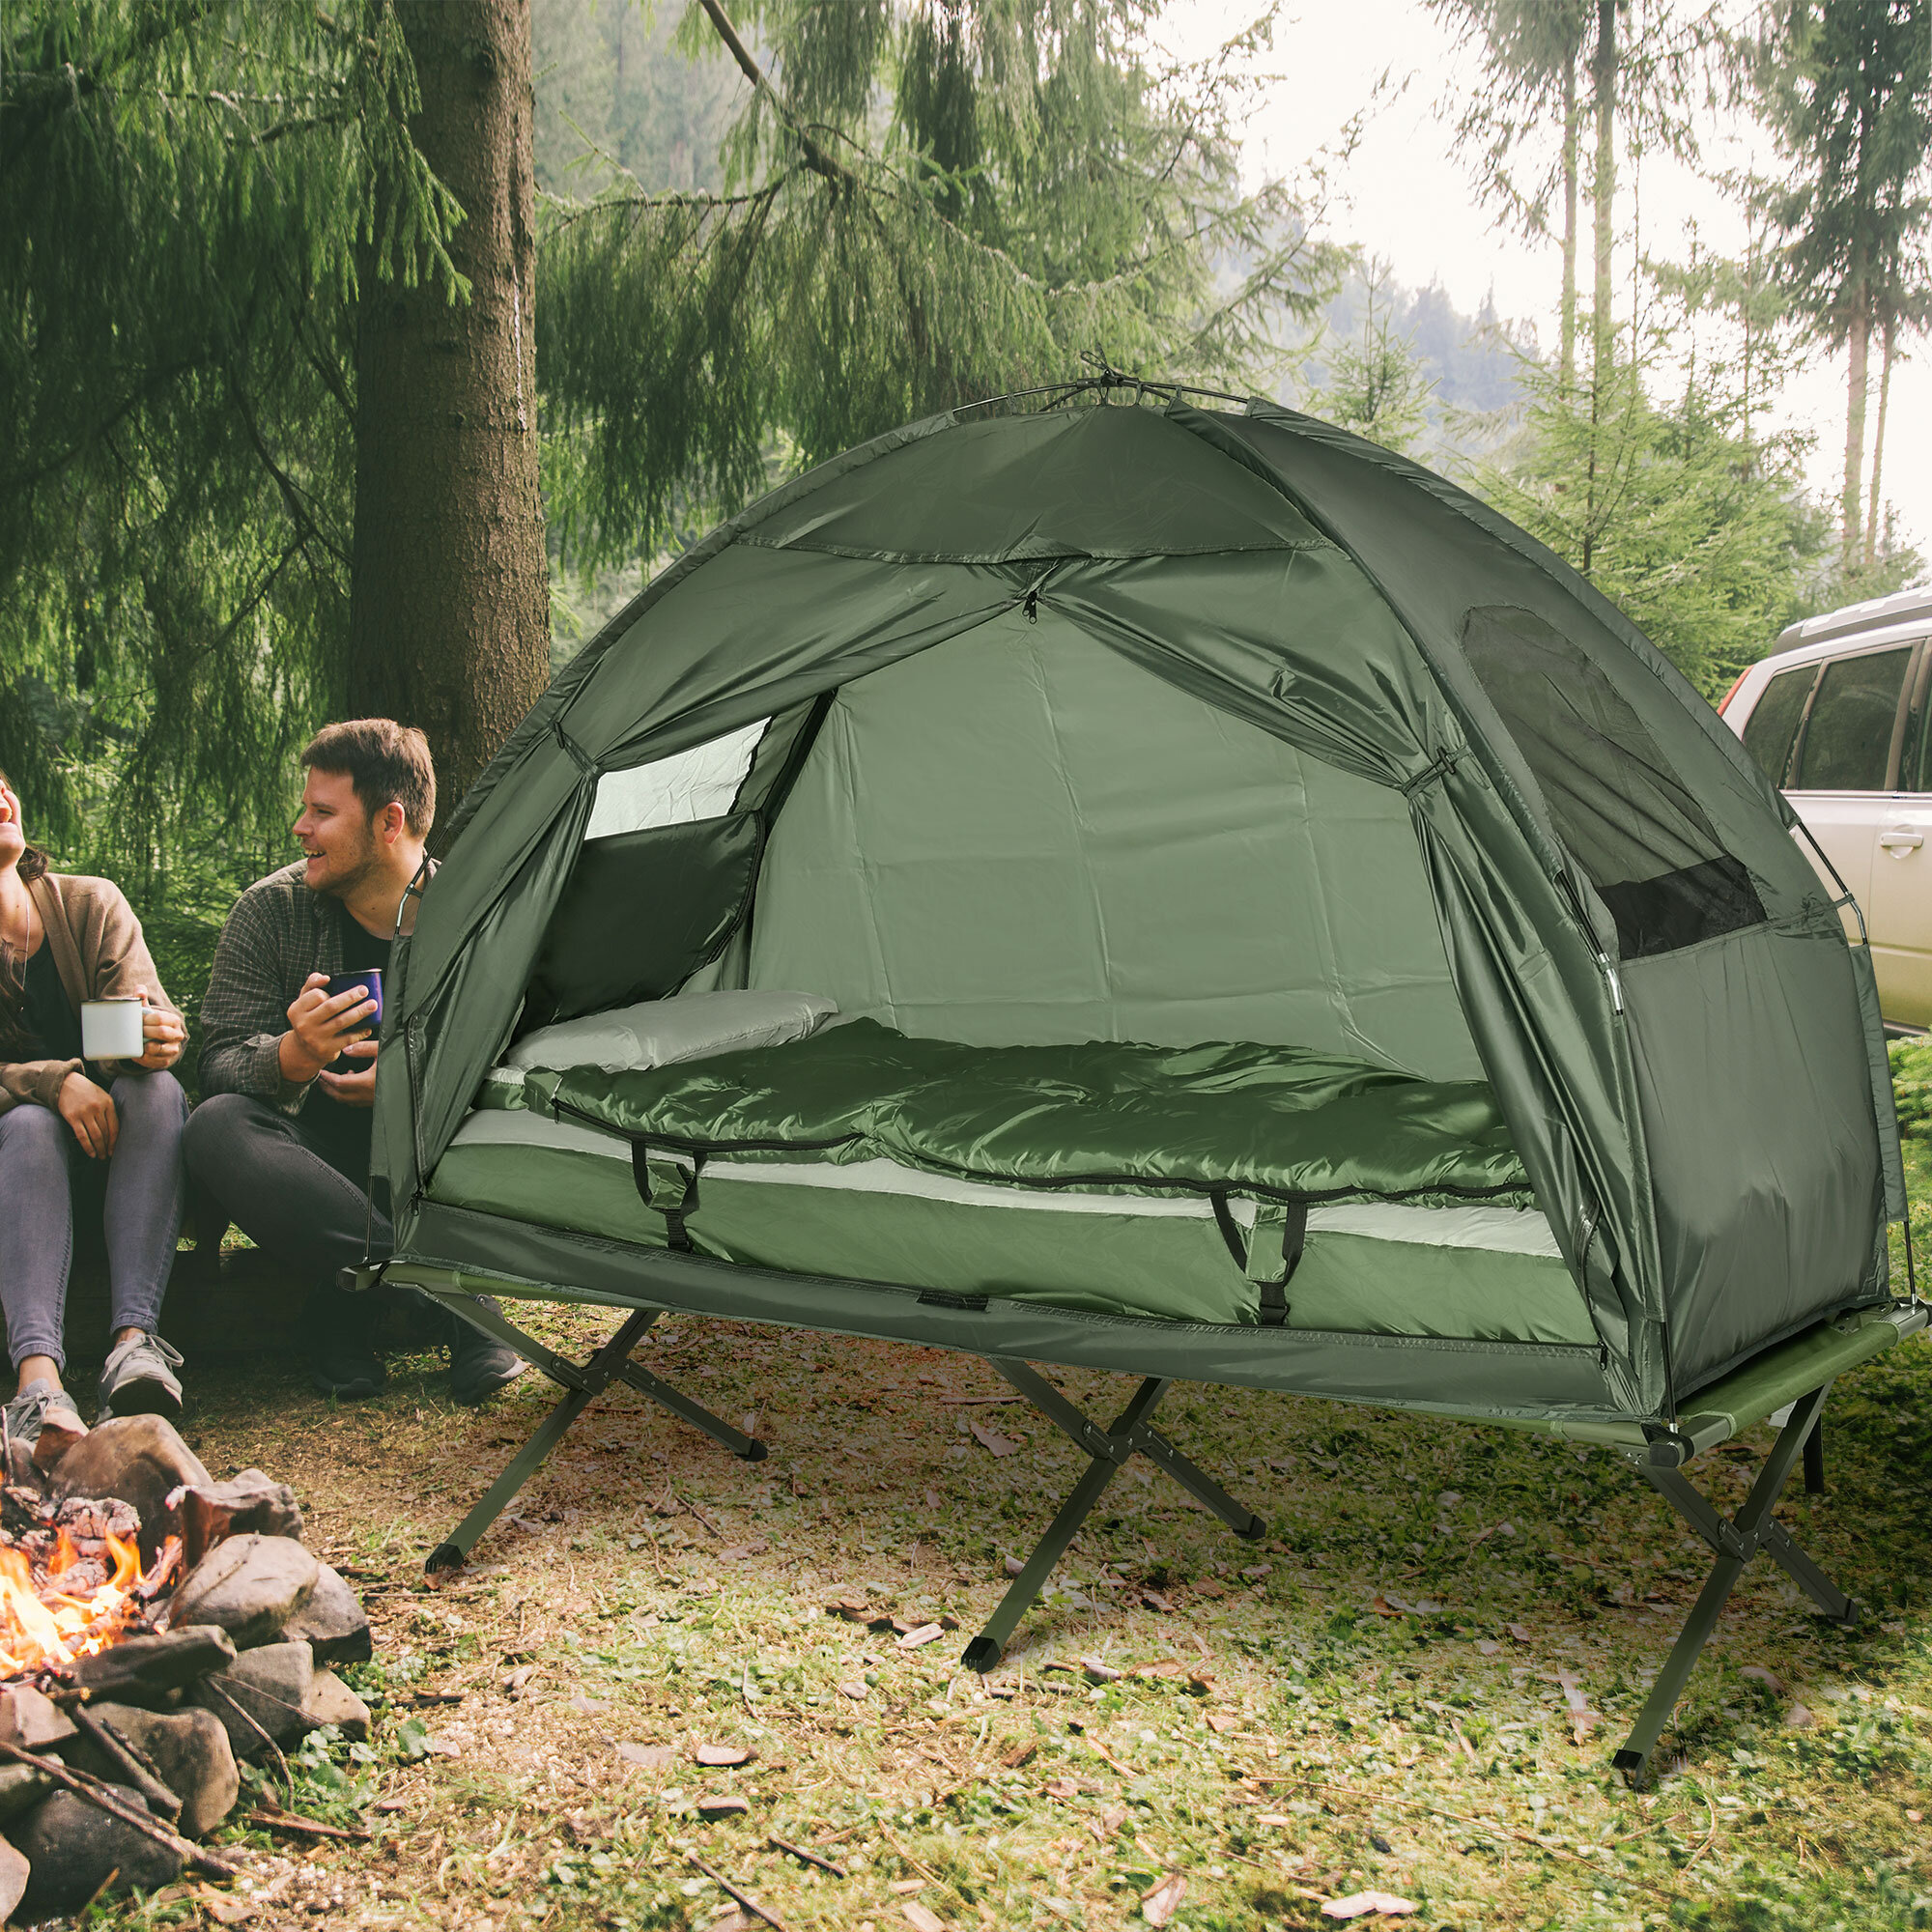 The Best Portable Fans for Camping - Beyond The Tent